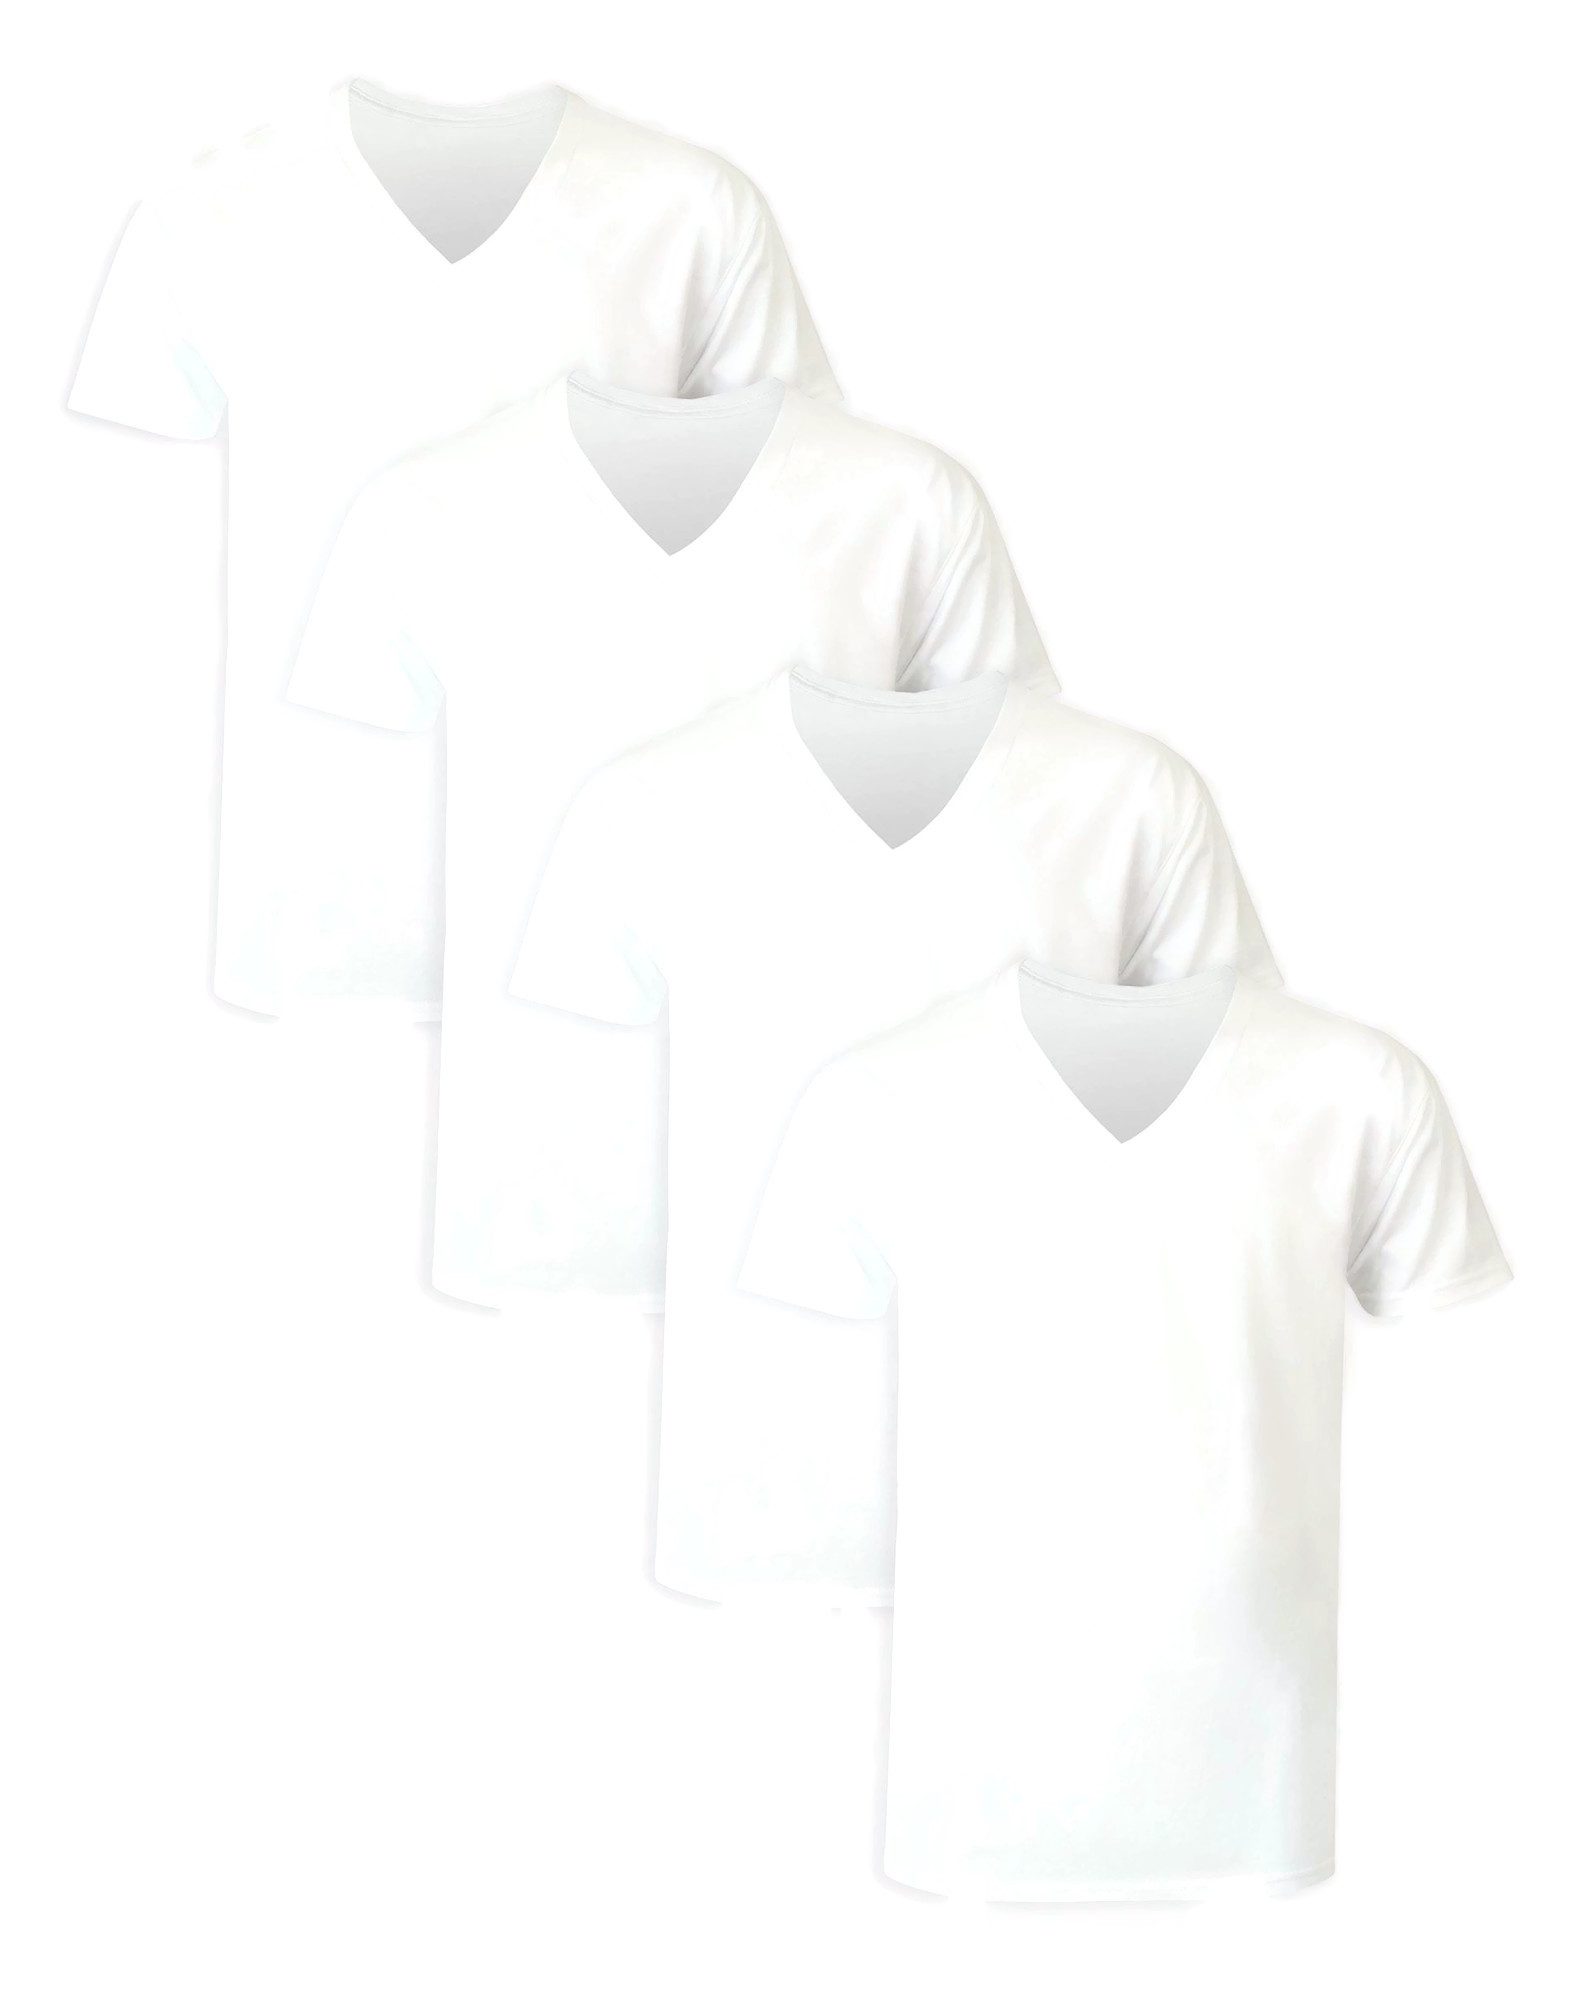 Hanes Ultimate Big Men's V-Neck White T-Shirt Pack, 100% Cotton, 4-Pack (Big & Tall Sizes)